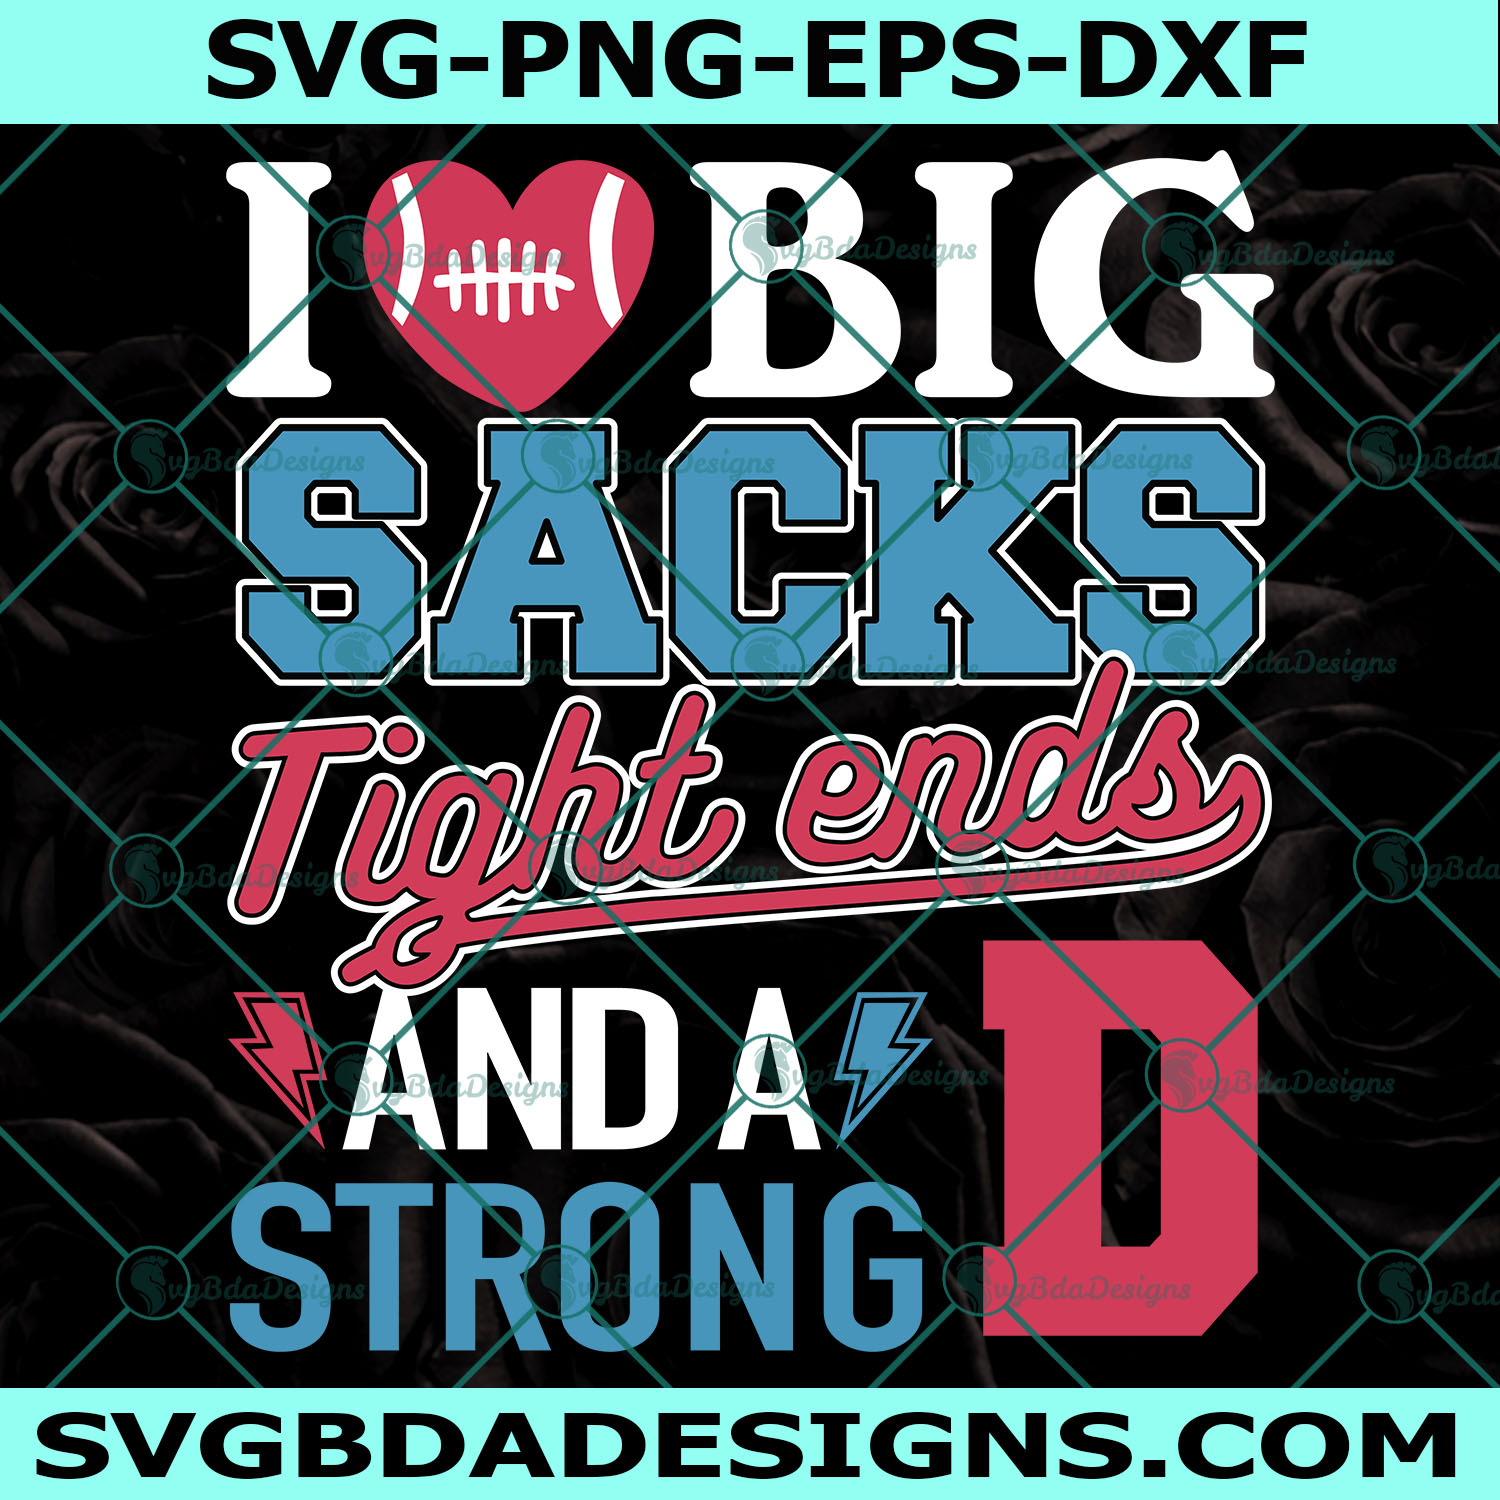 I Love Big Sacks Tight Ends SVG, And A Strong D Football Funny Svg, File For Cricut